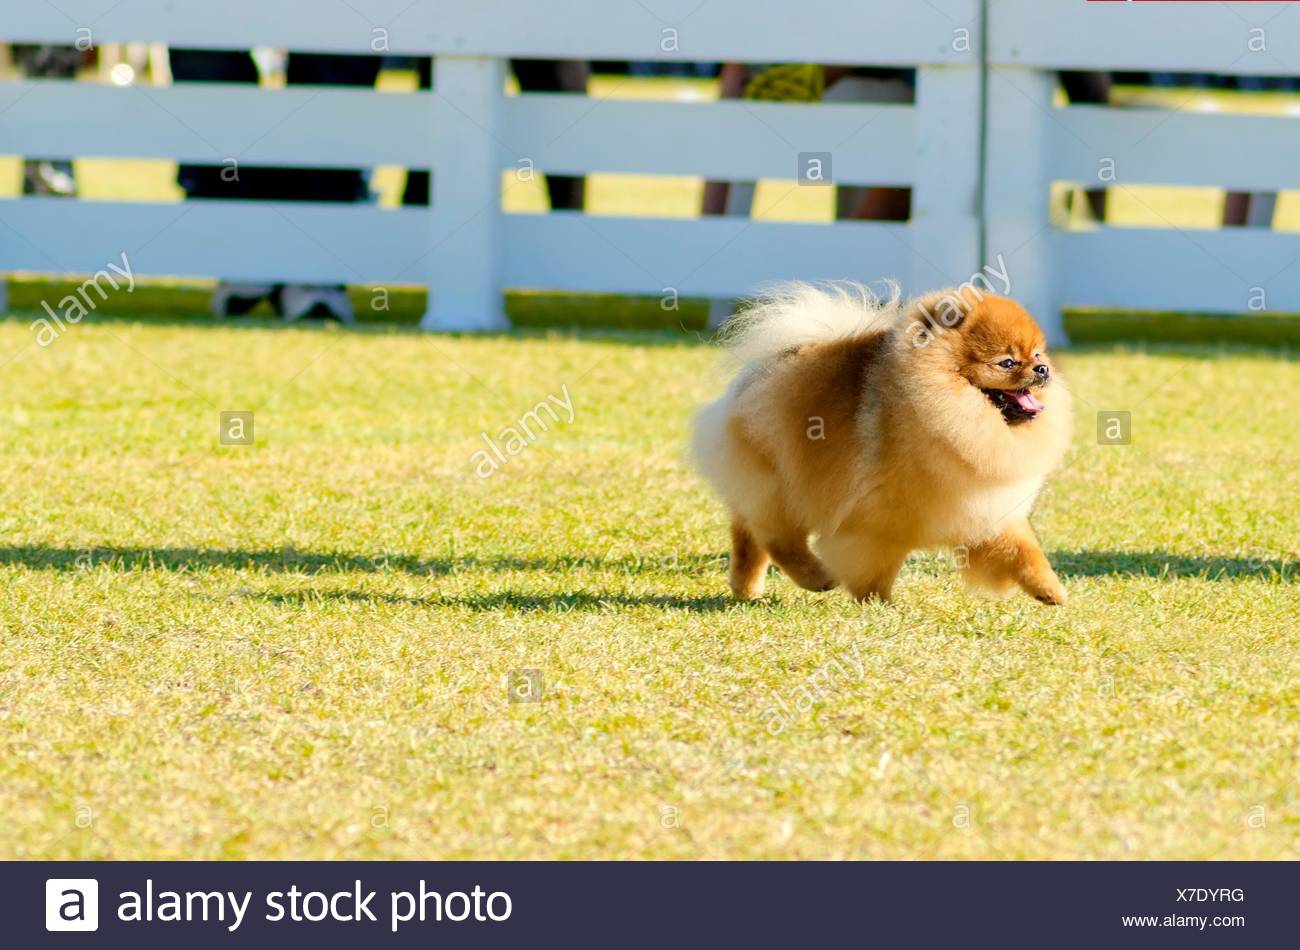 Toy Pom High Resolution Stock Photography and Images - Alamy